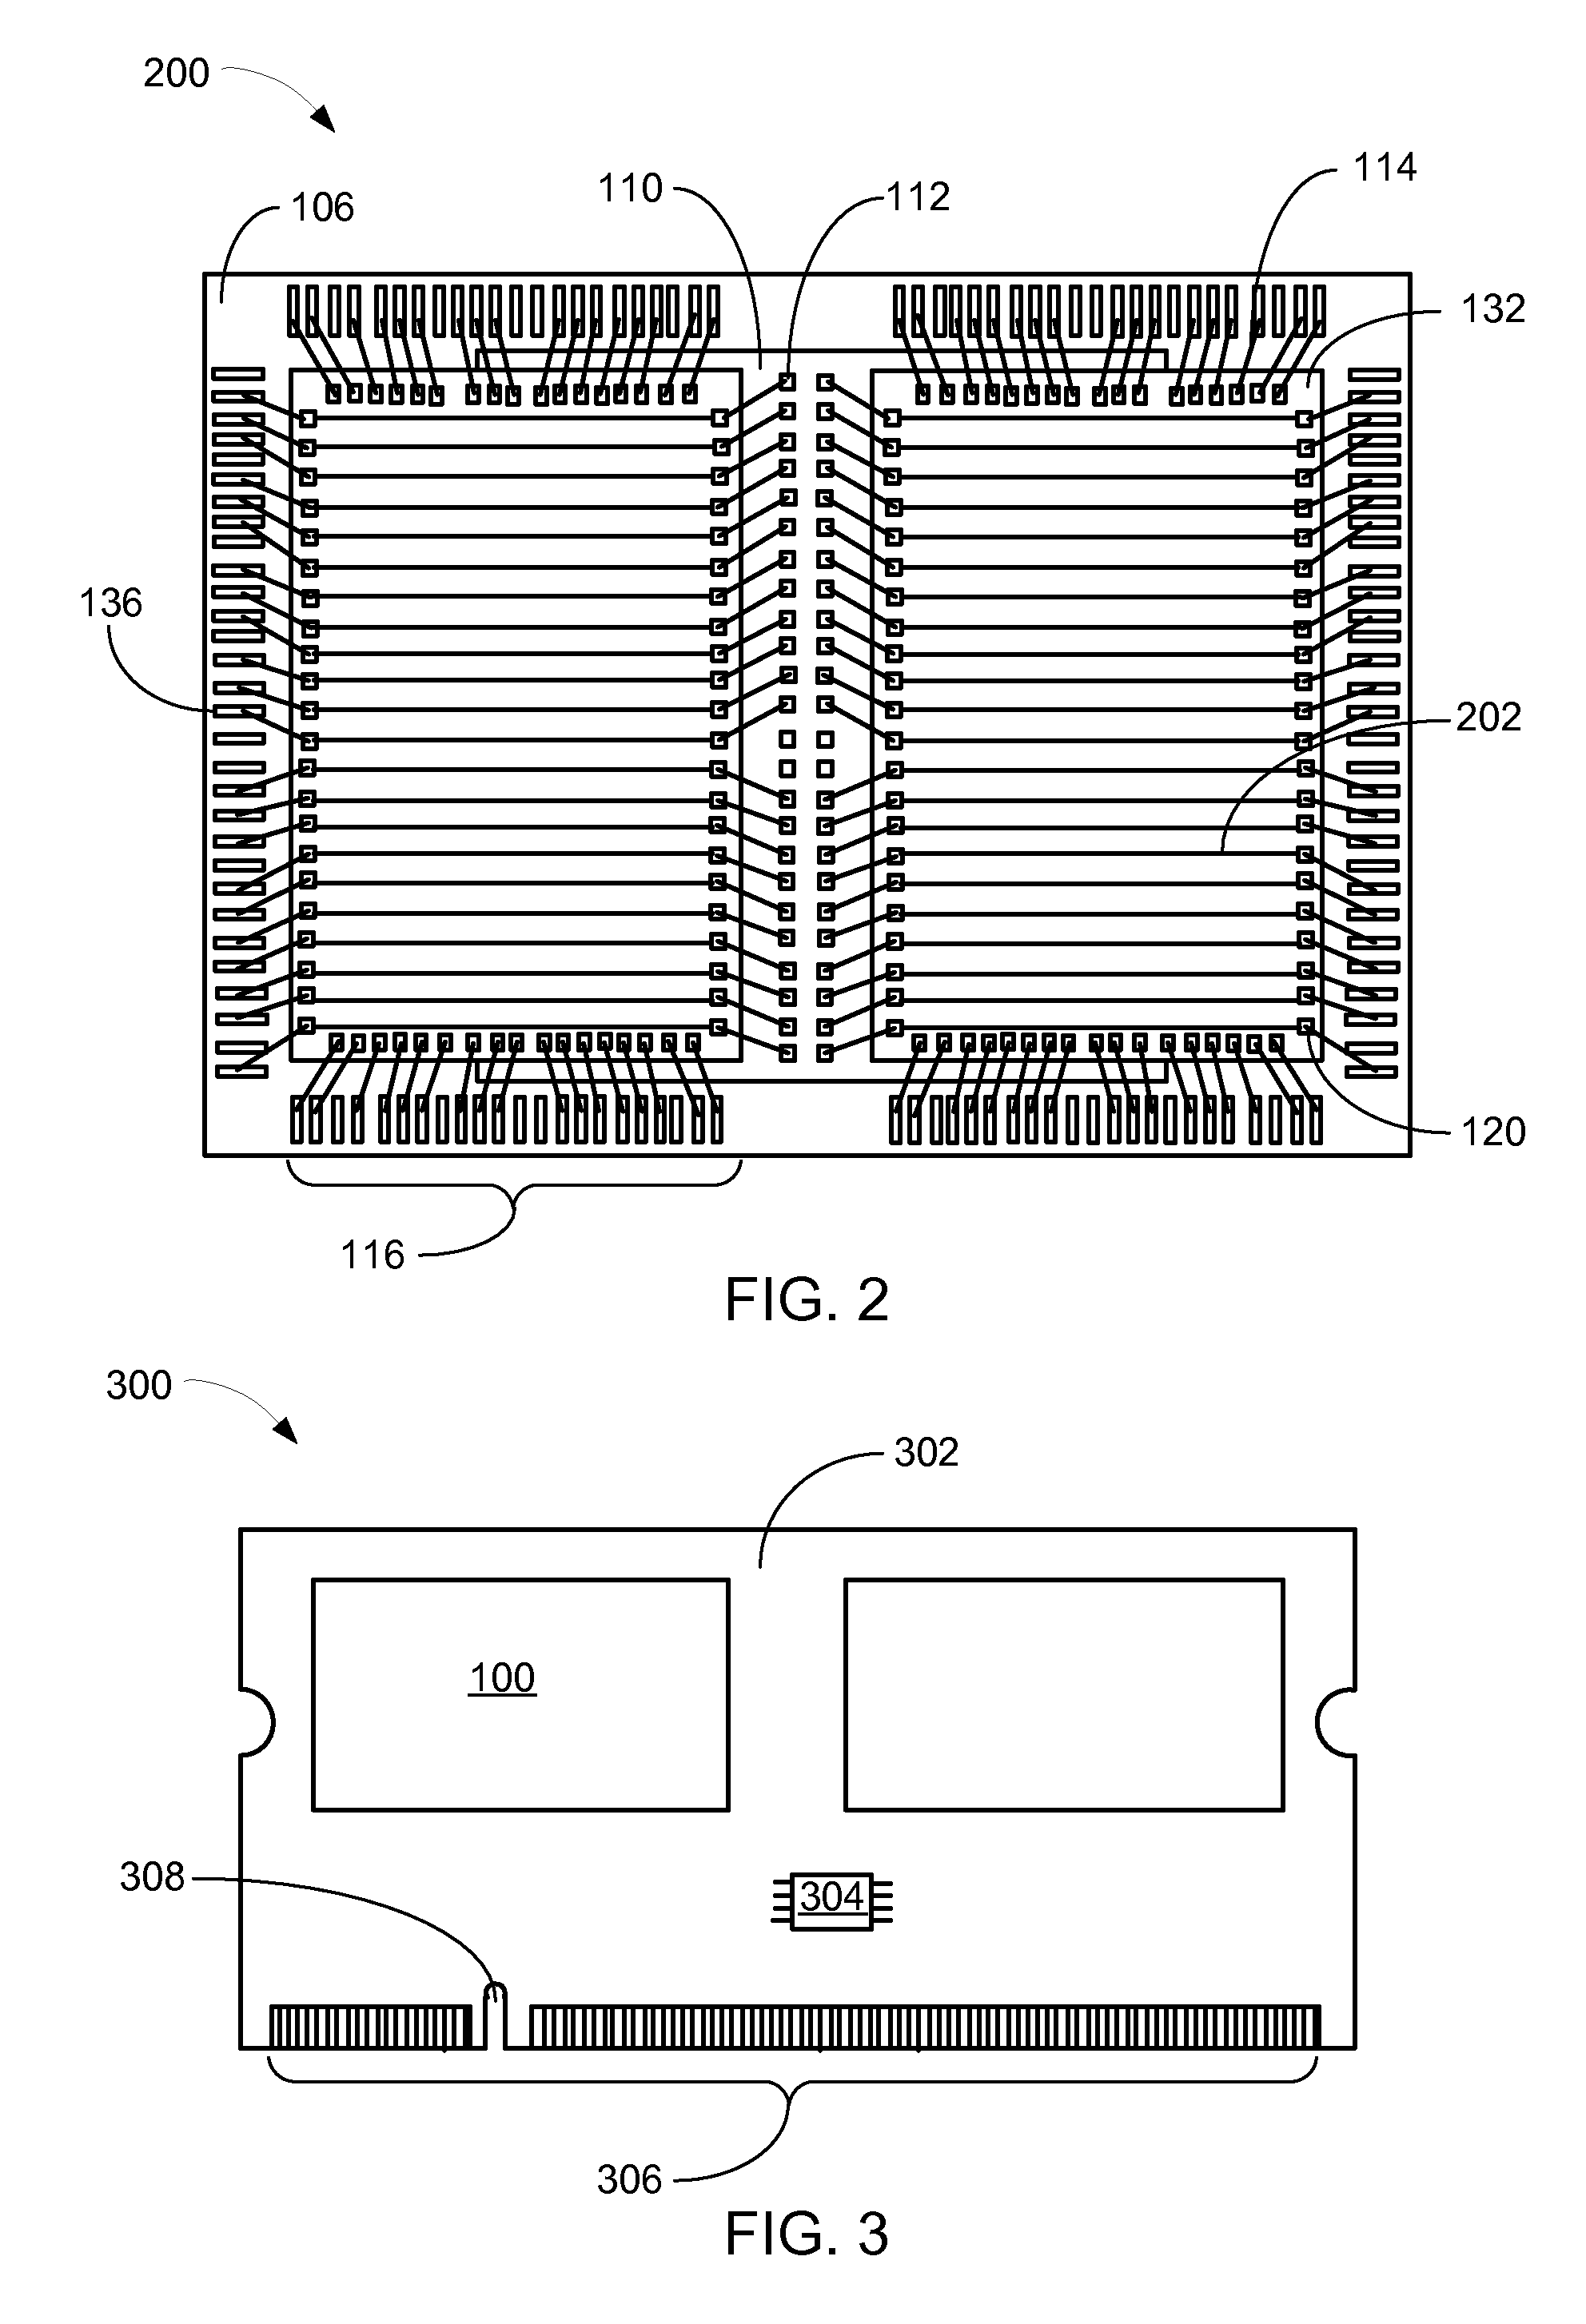 Integrated circuit package system with stacked devices